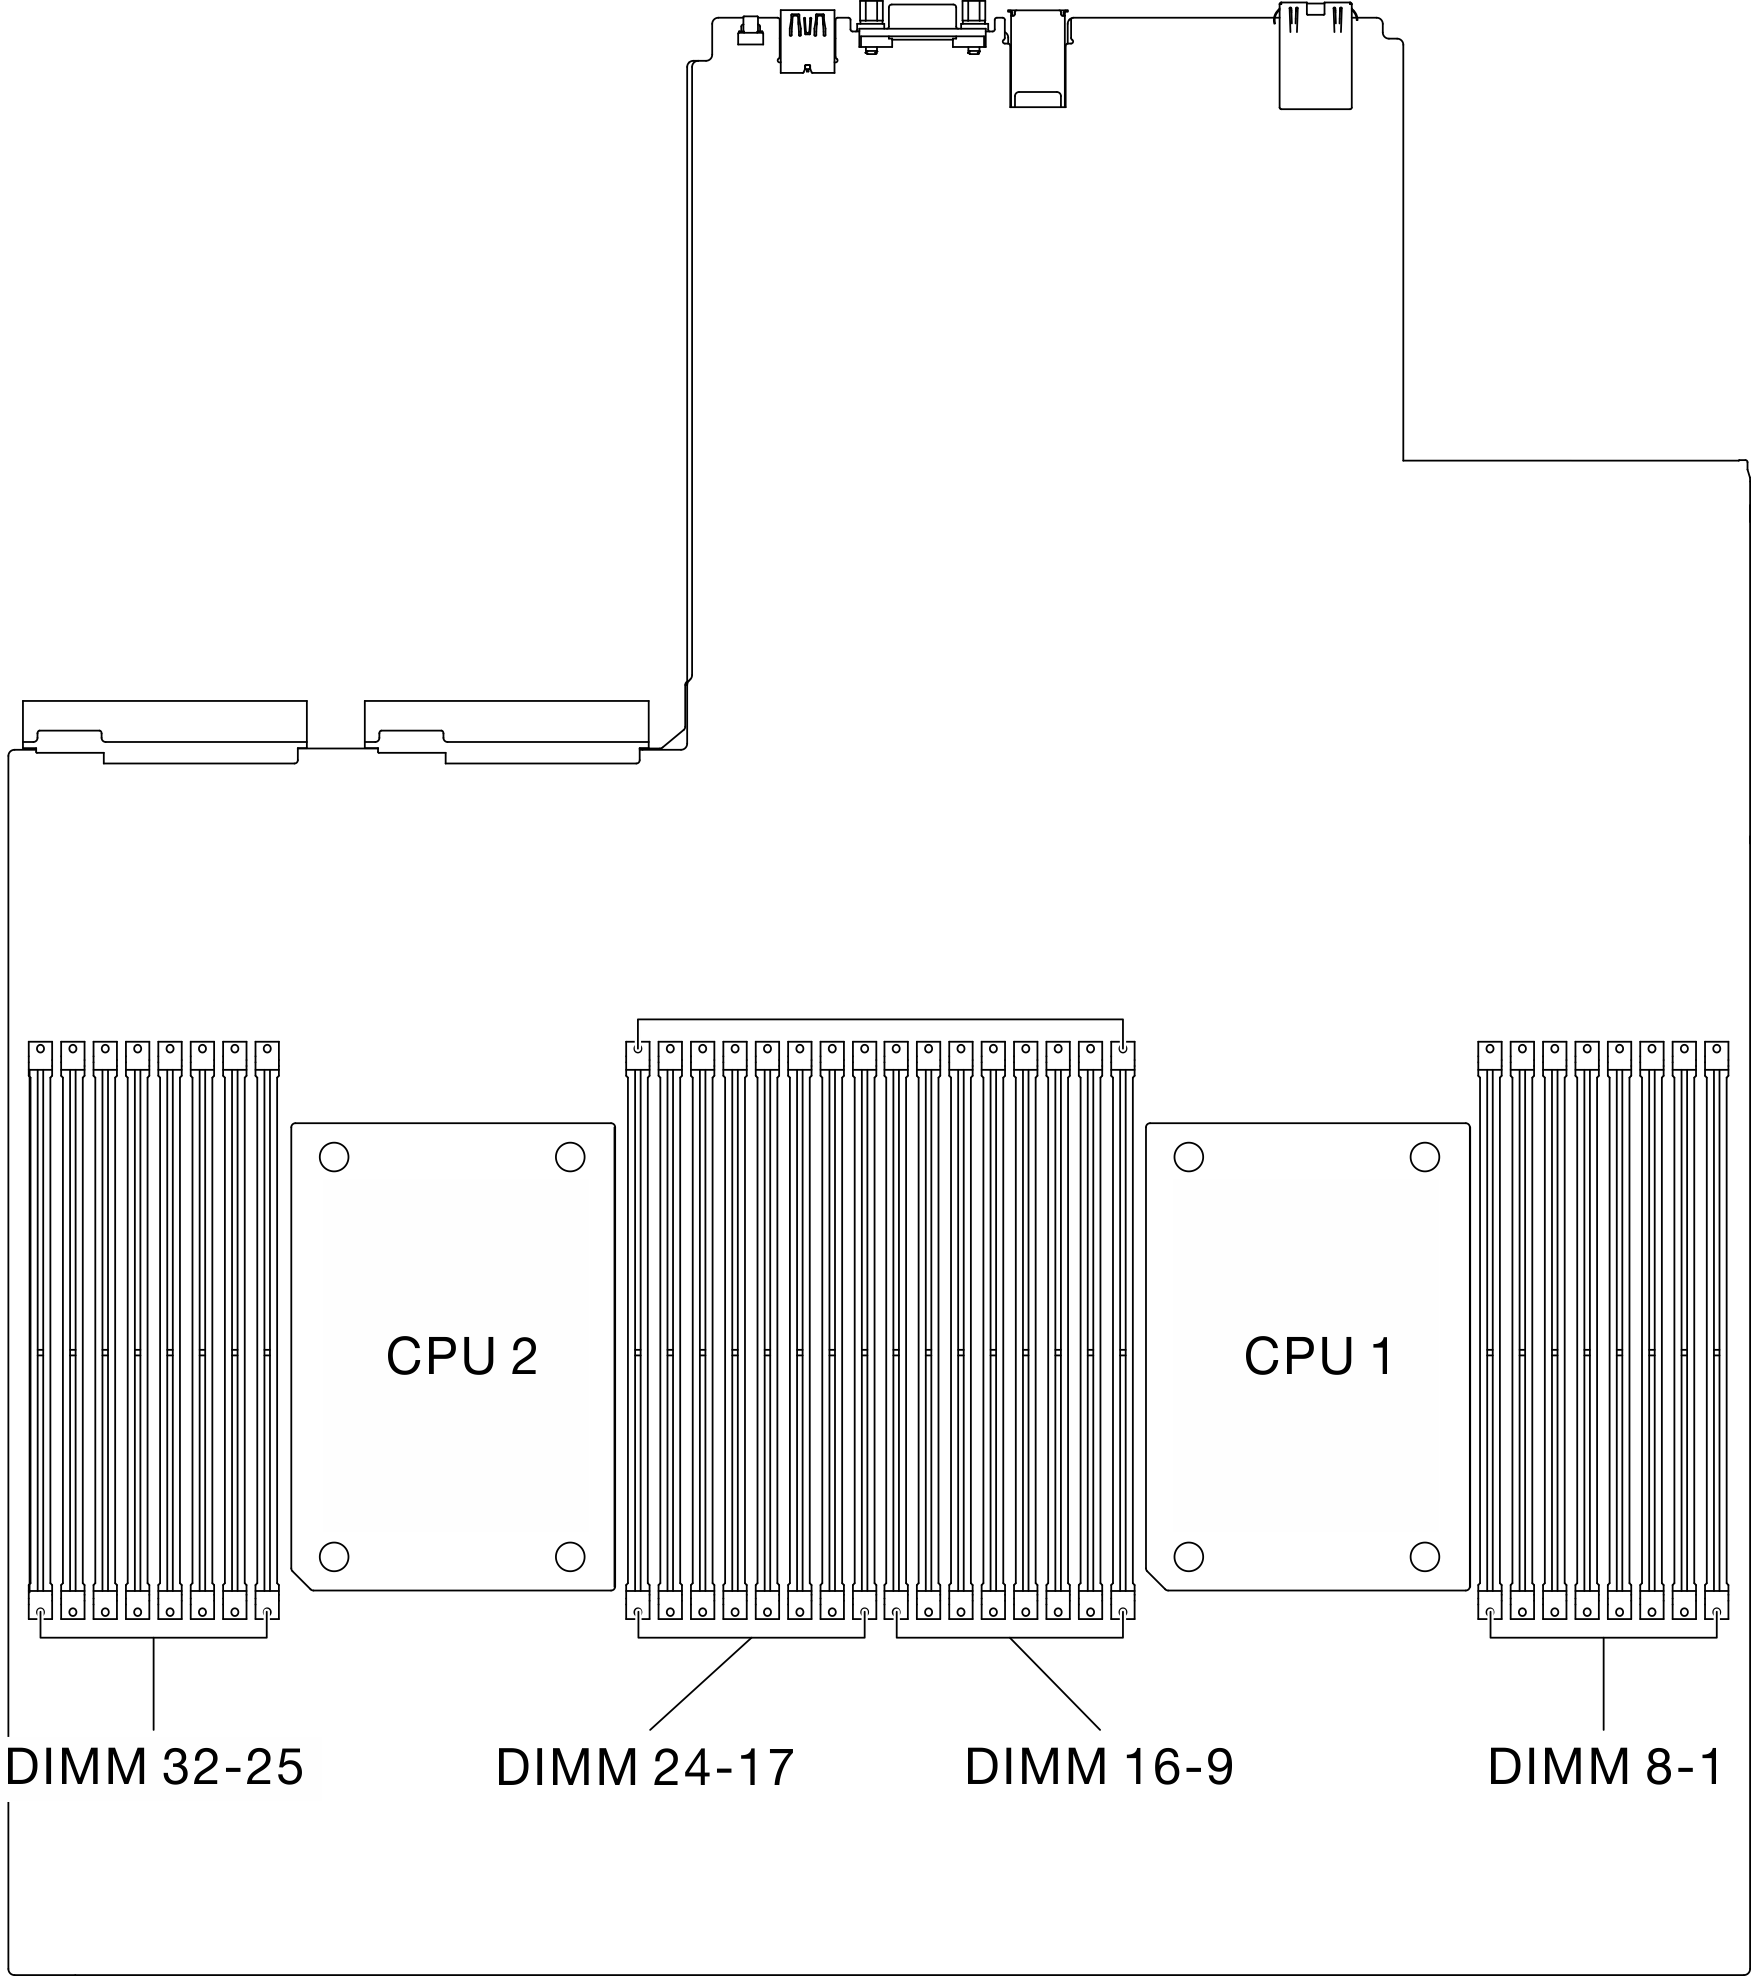 Location of memory modules and processor sockets